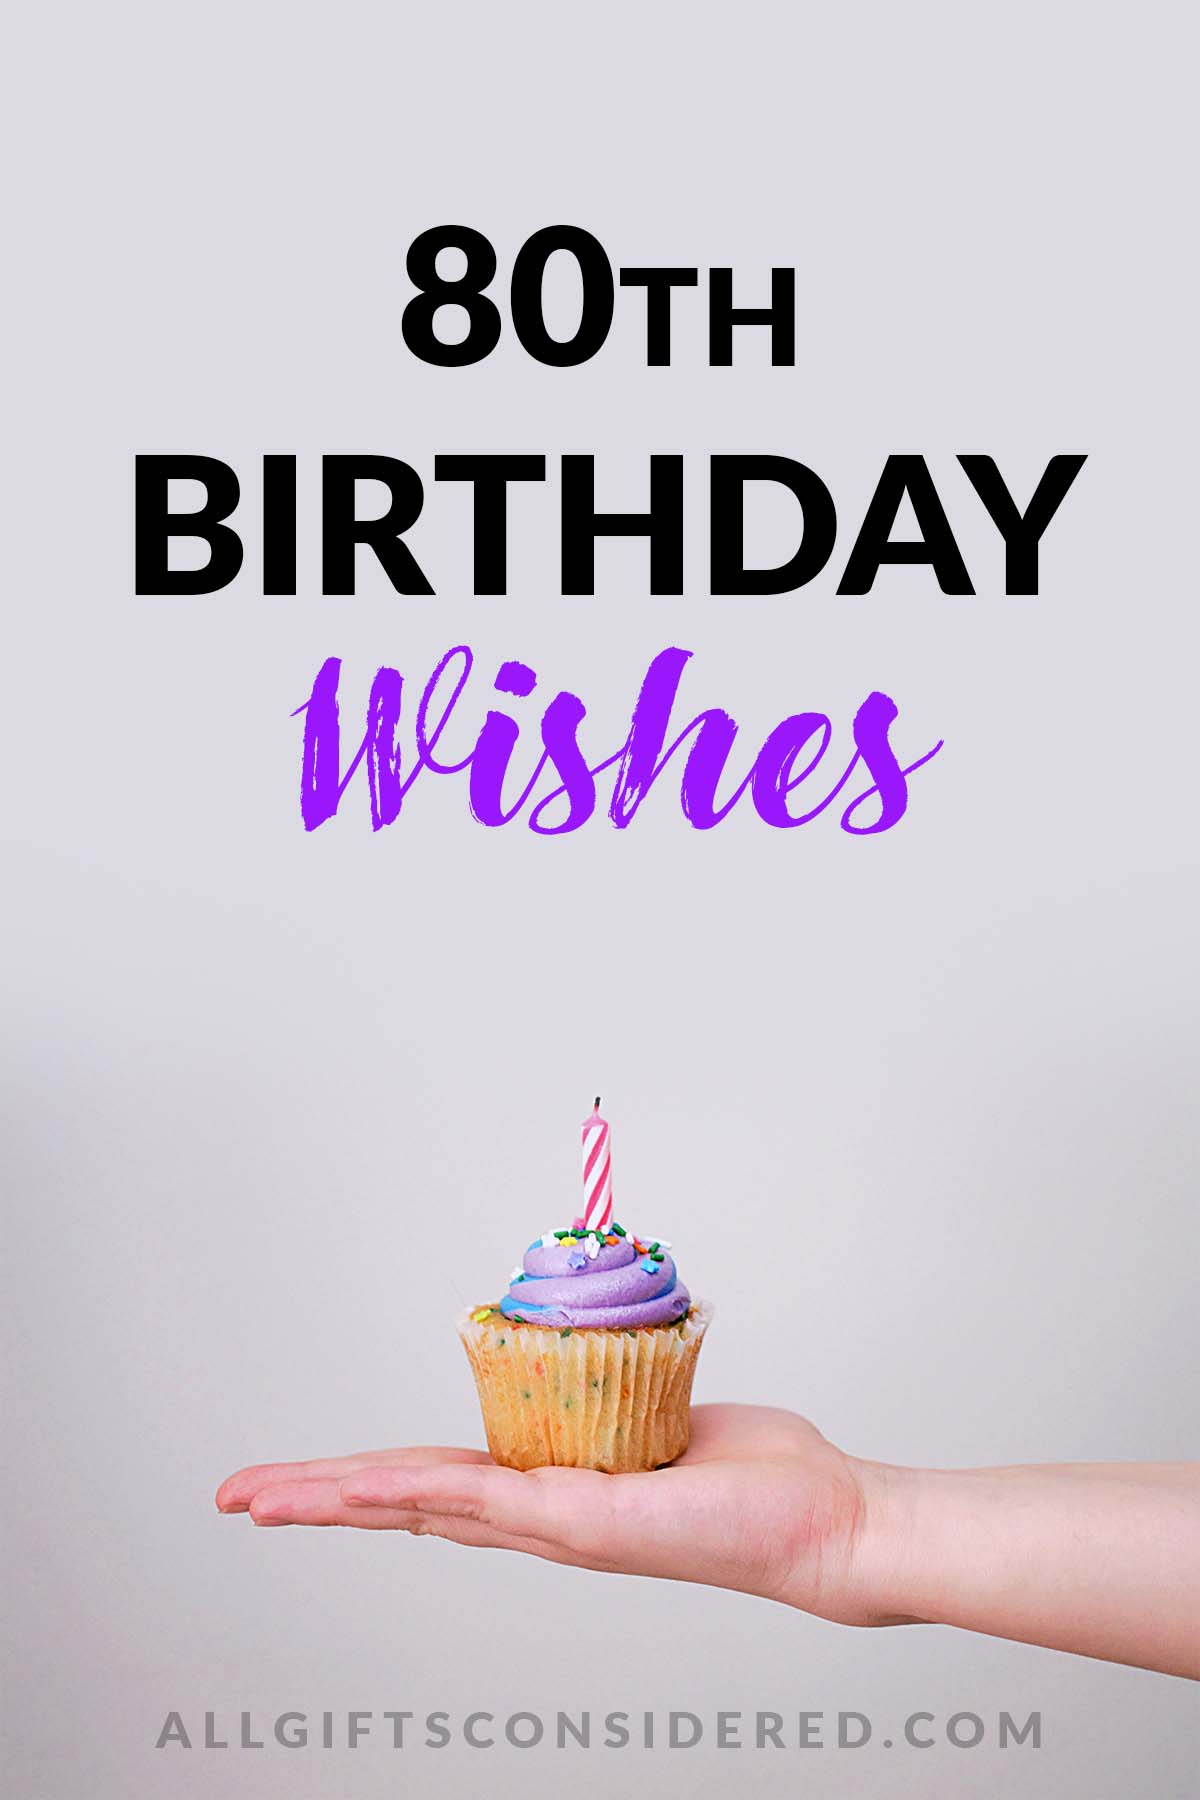 80th birthday wishes - feature image